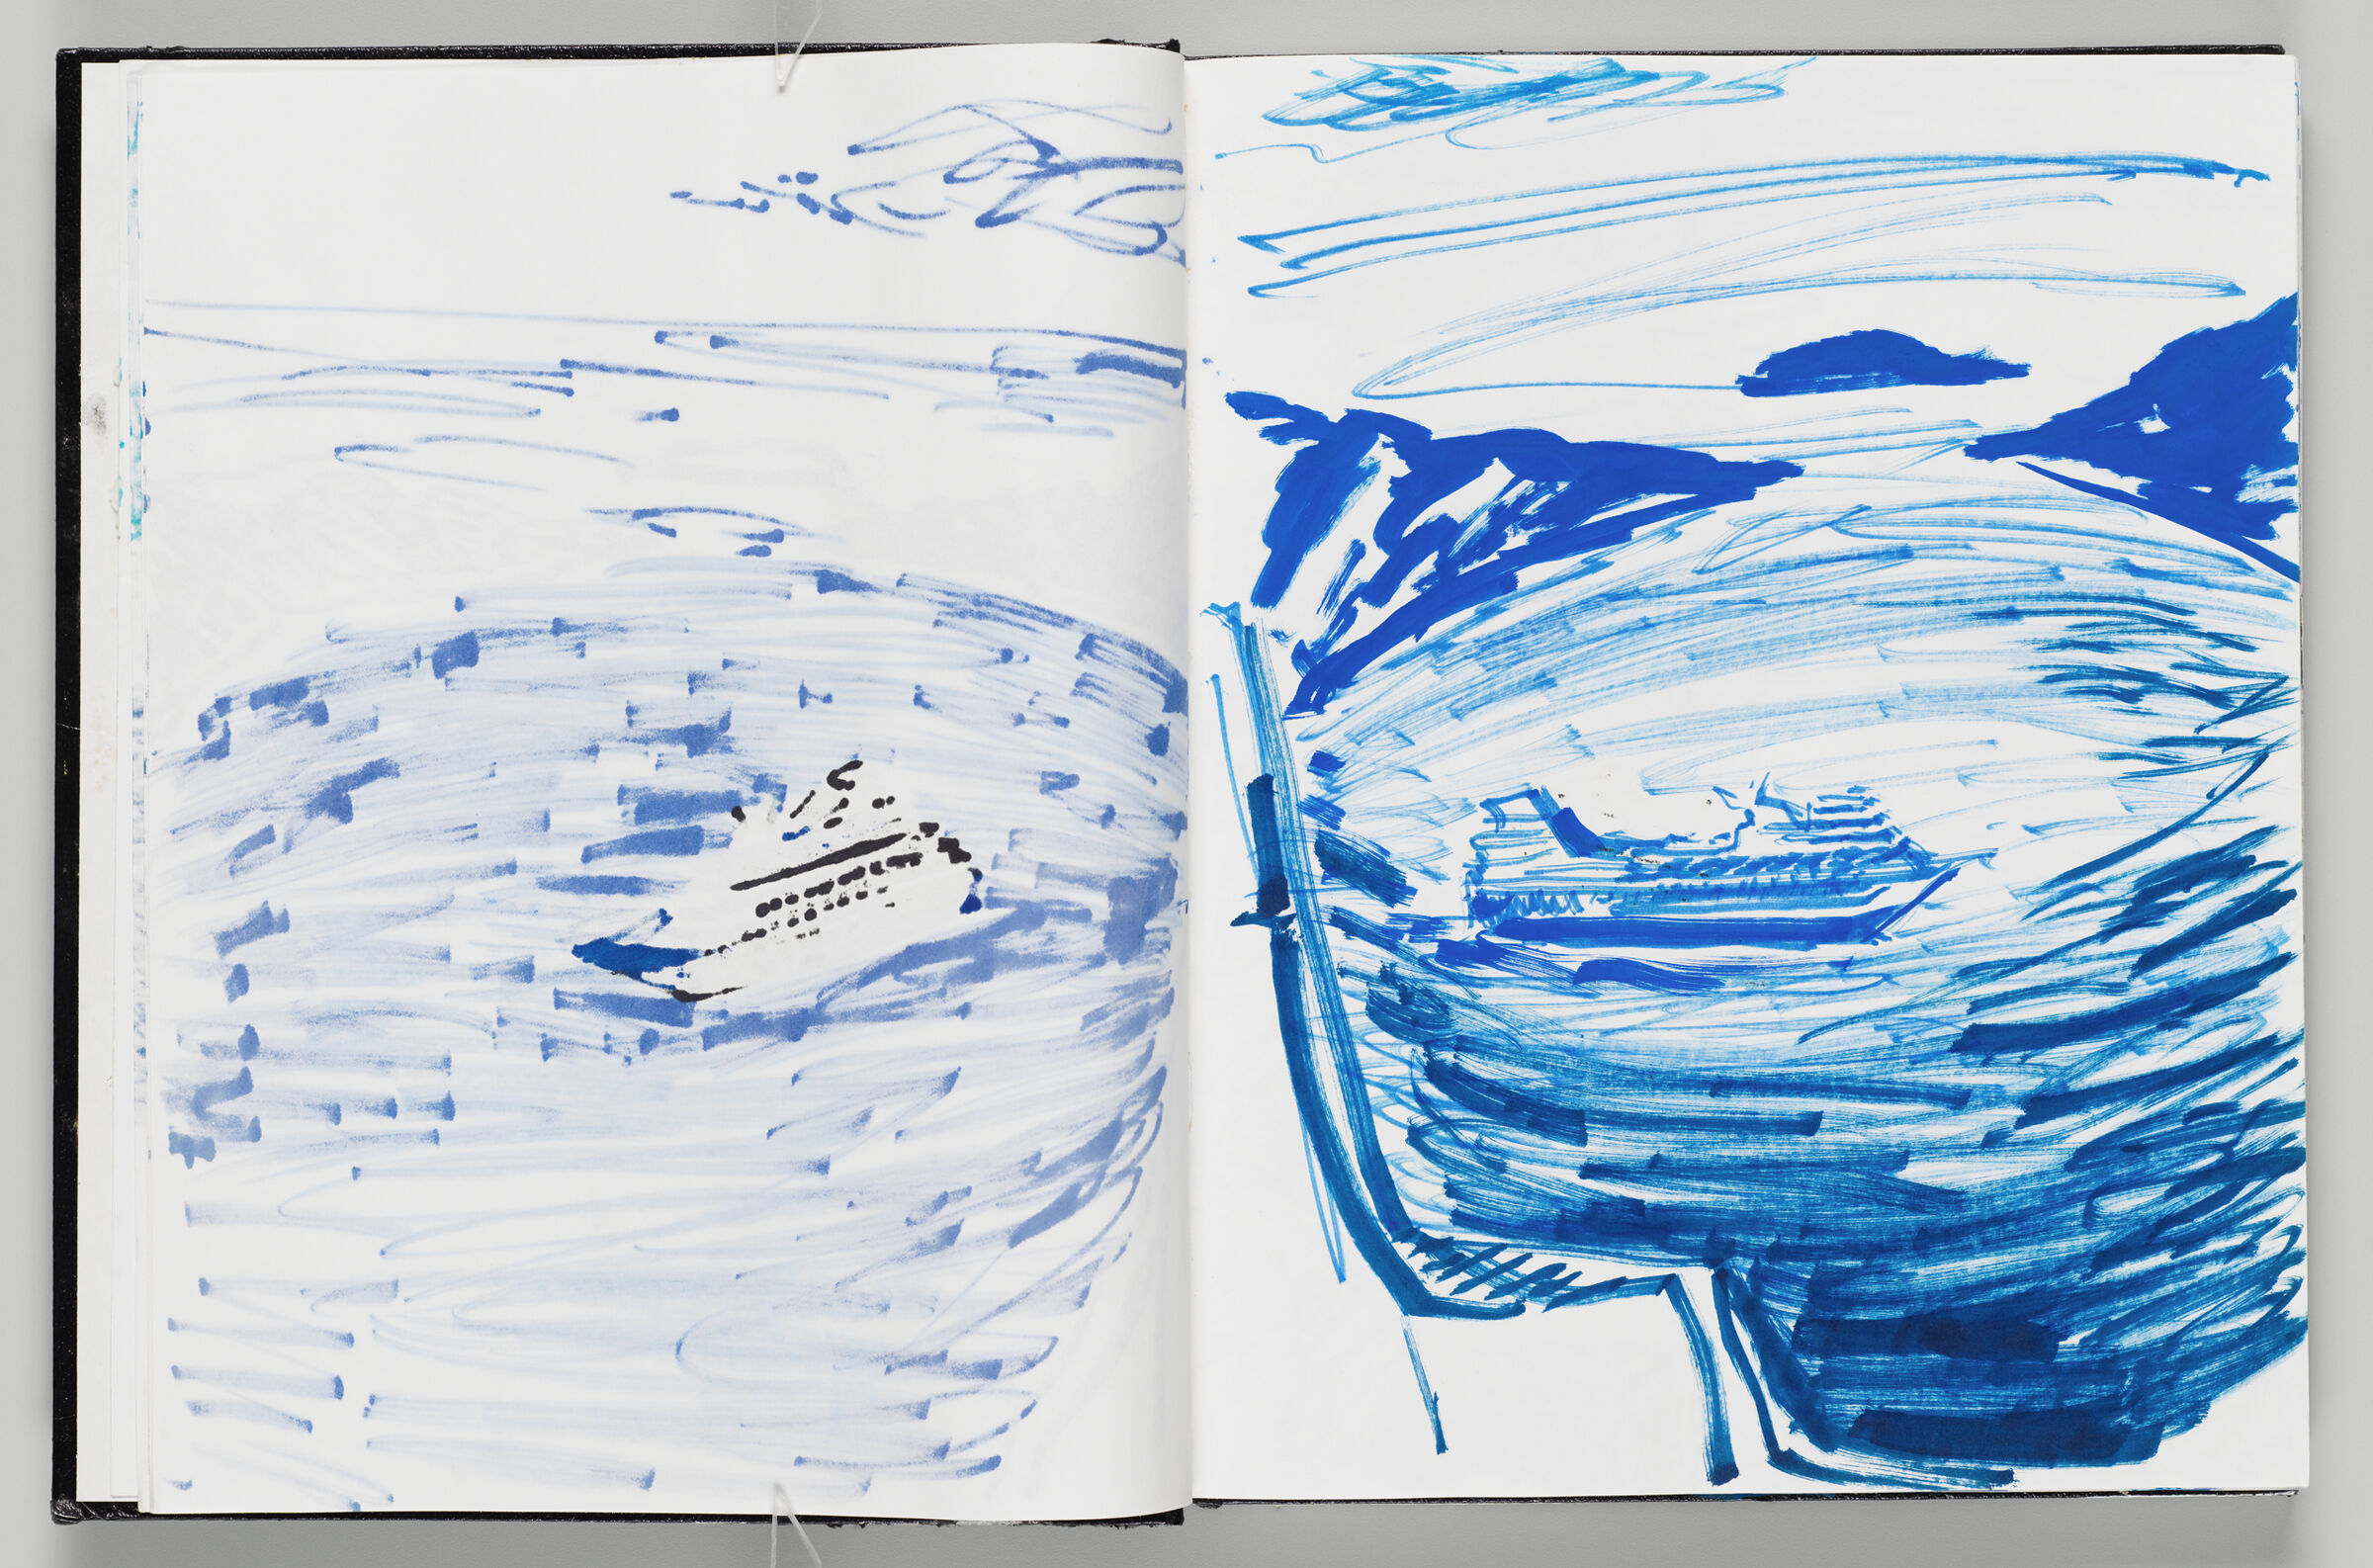 Untitled (Bleed-Through Of Previous Page, Left Page); Untitled (Seascape With Cruise Ship, Right Page)